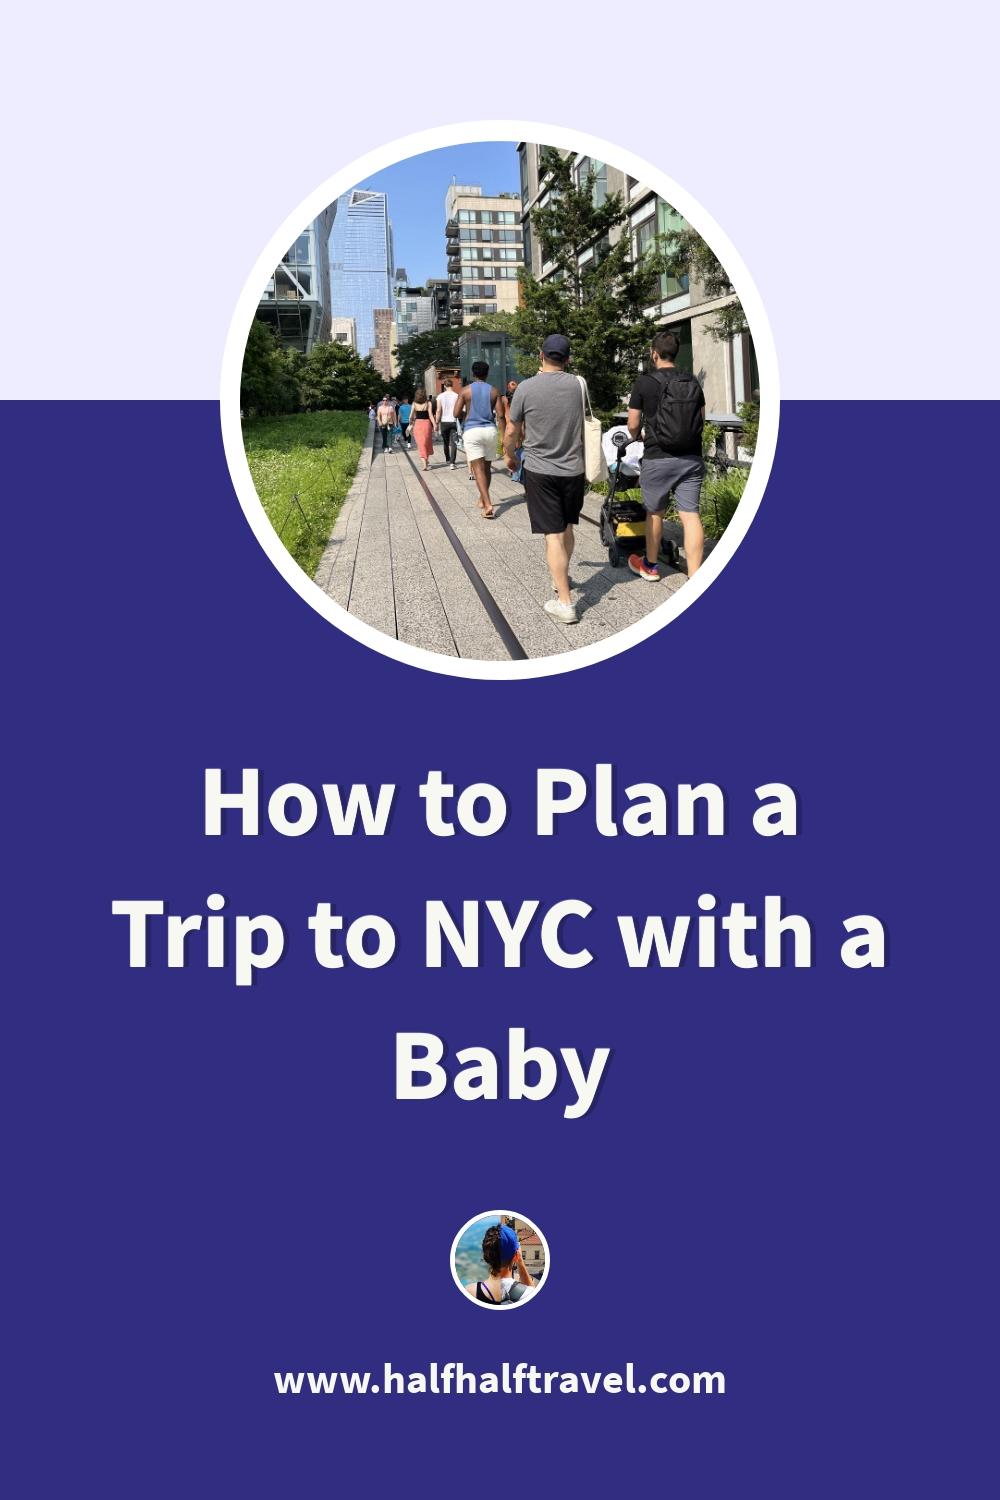 Pinterest image from the 'How to Plan a Trip to NYC with a Baby (What to Know)' article on Half Half Travel